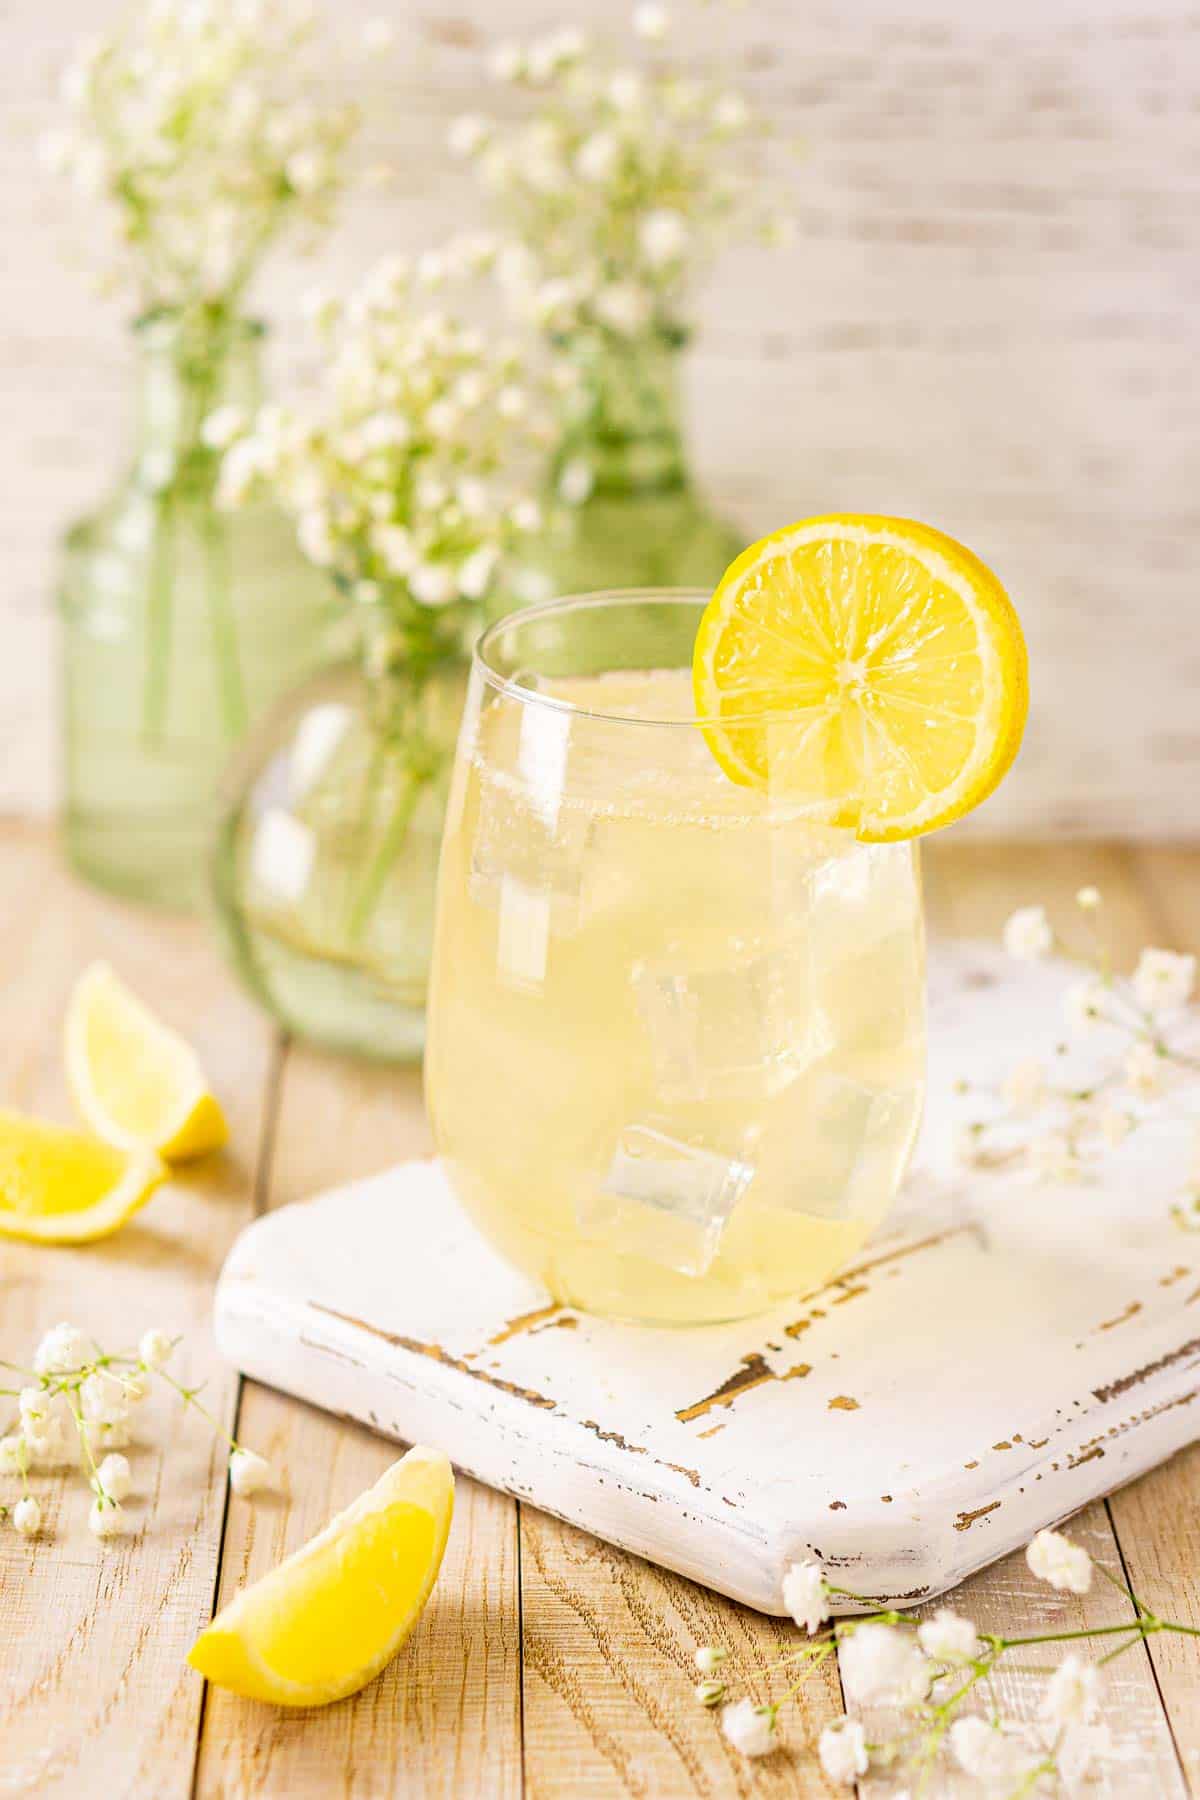 A glass of the St. Germain elderflower spritz on a wooden tray with white flowers and lemon slices in front.